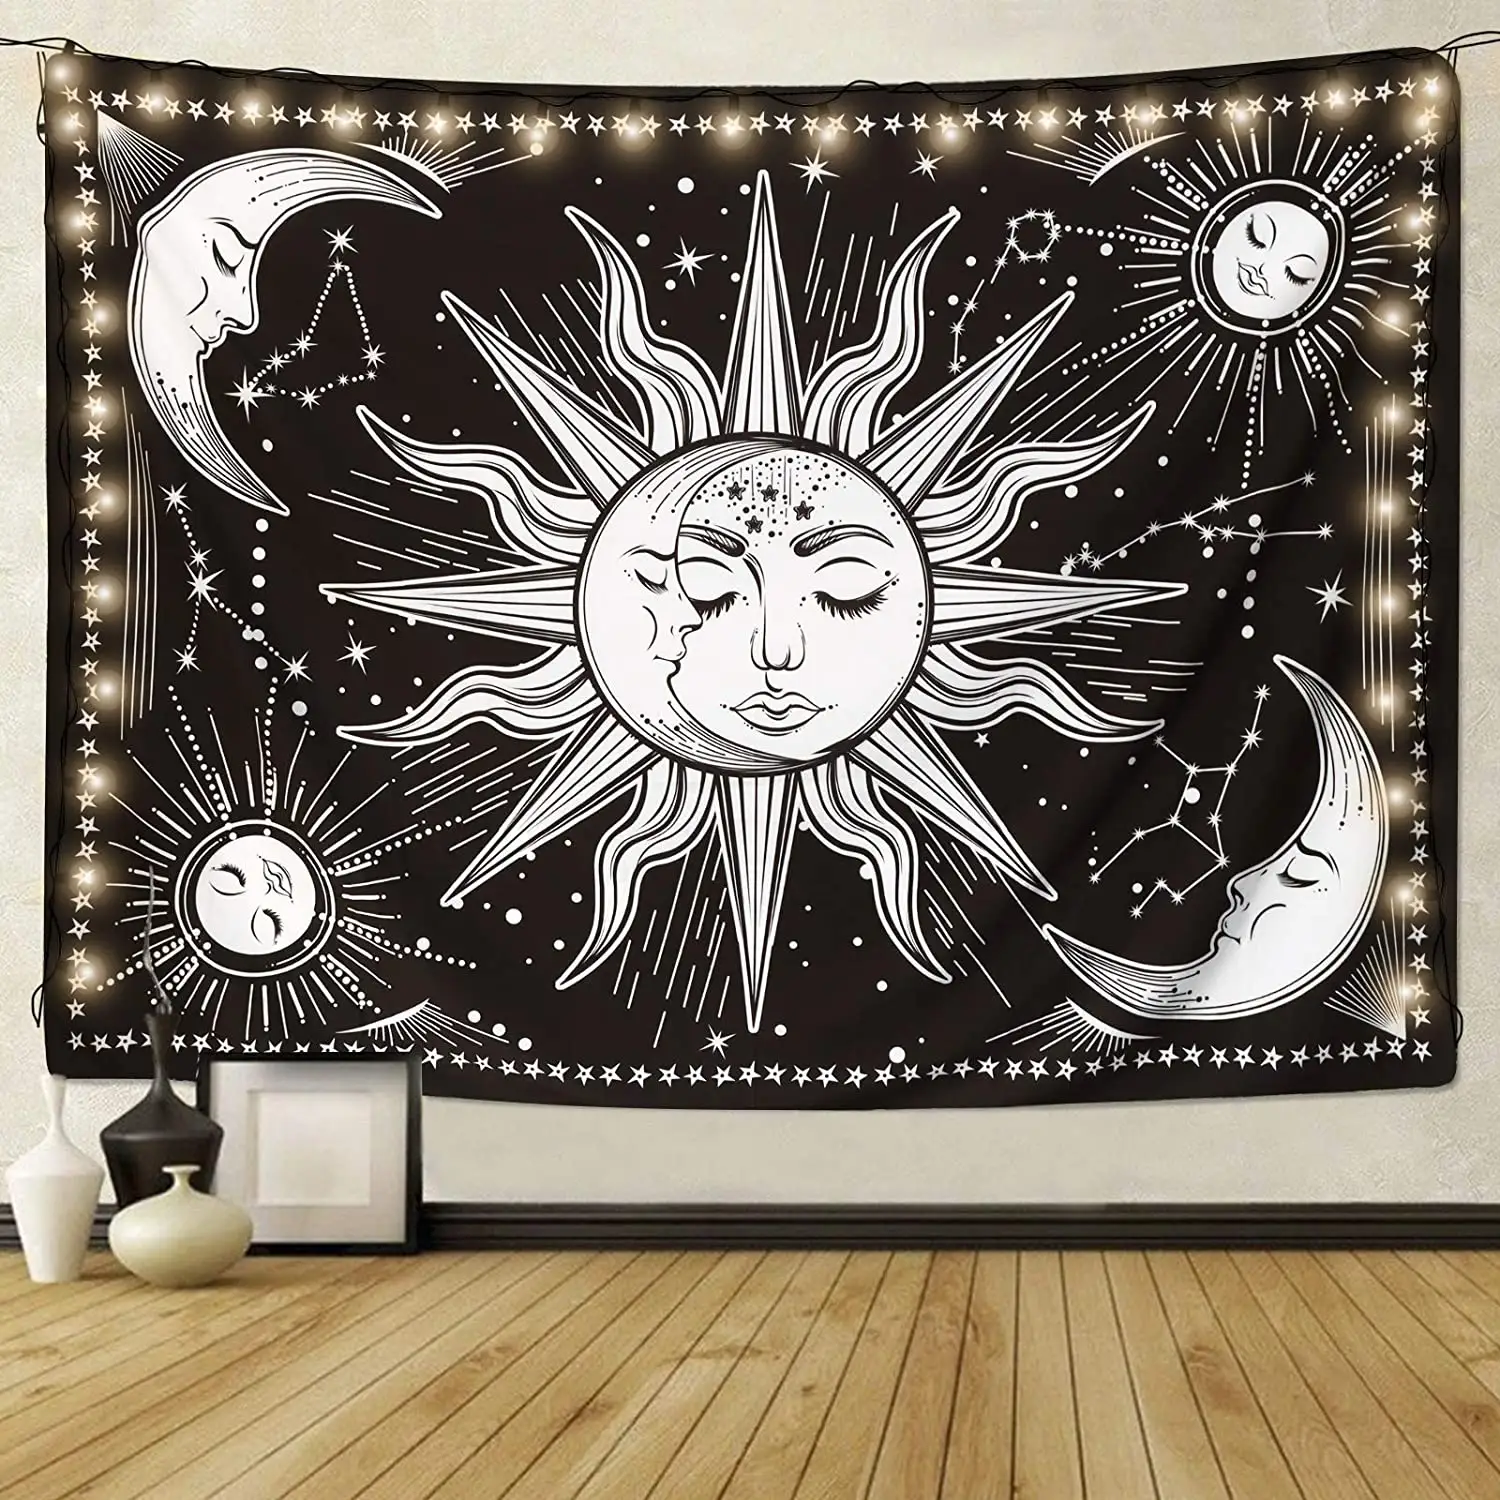 Tapestry White Sun And Moon Tapestry Black And White Tapestries Sun With Star Wall Art Home Decoration Tapisserie Murale Tapiz Pared Tapestry